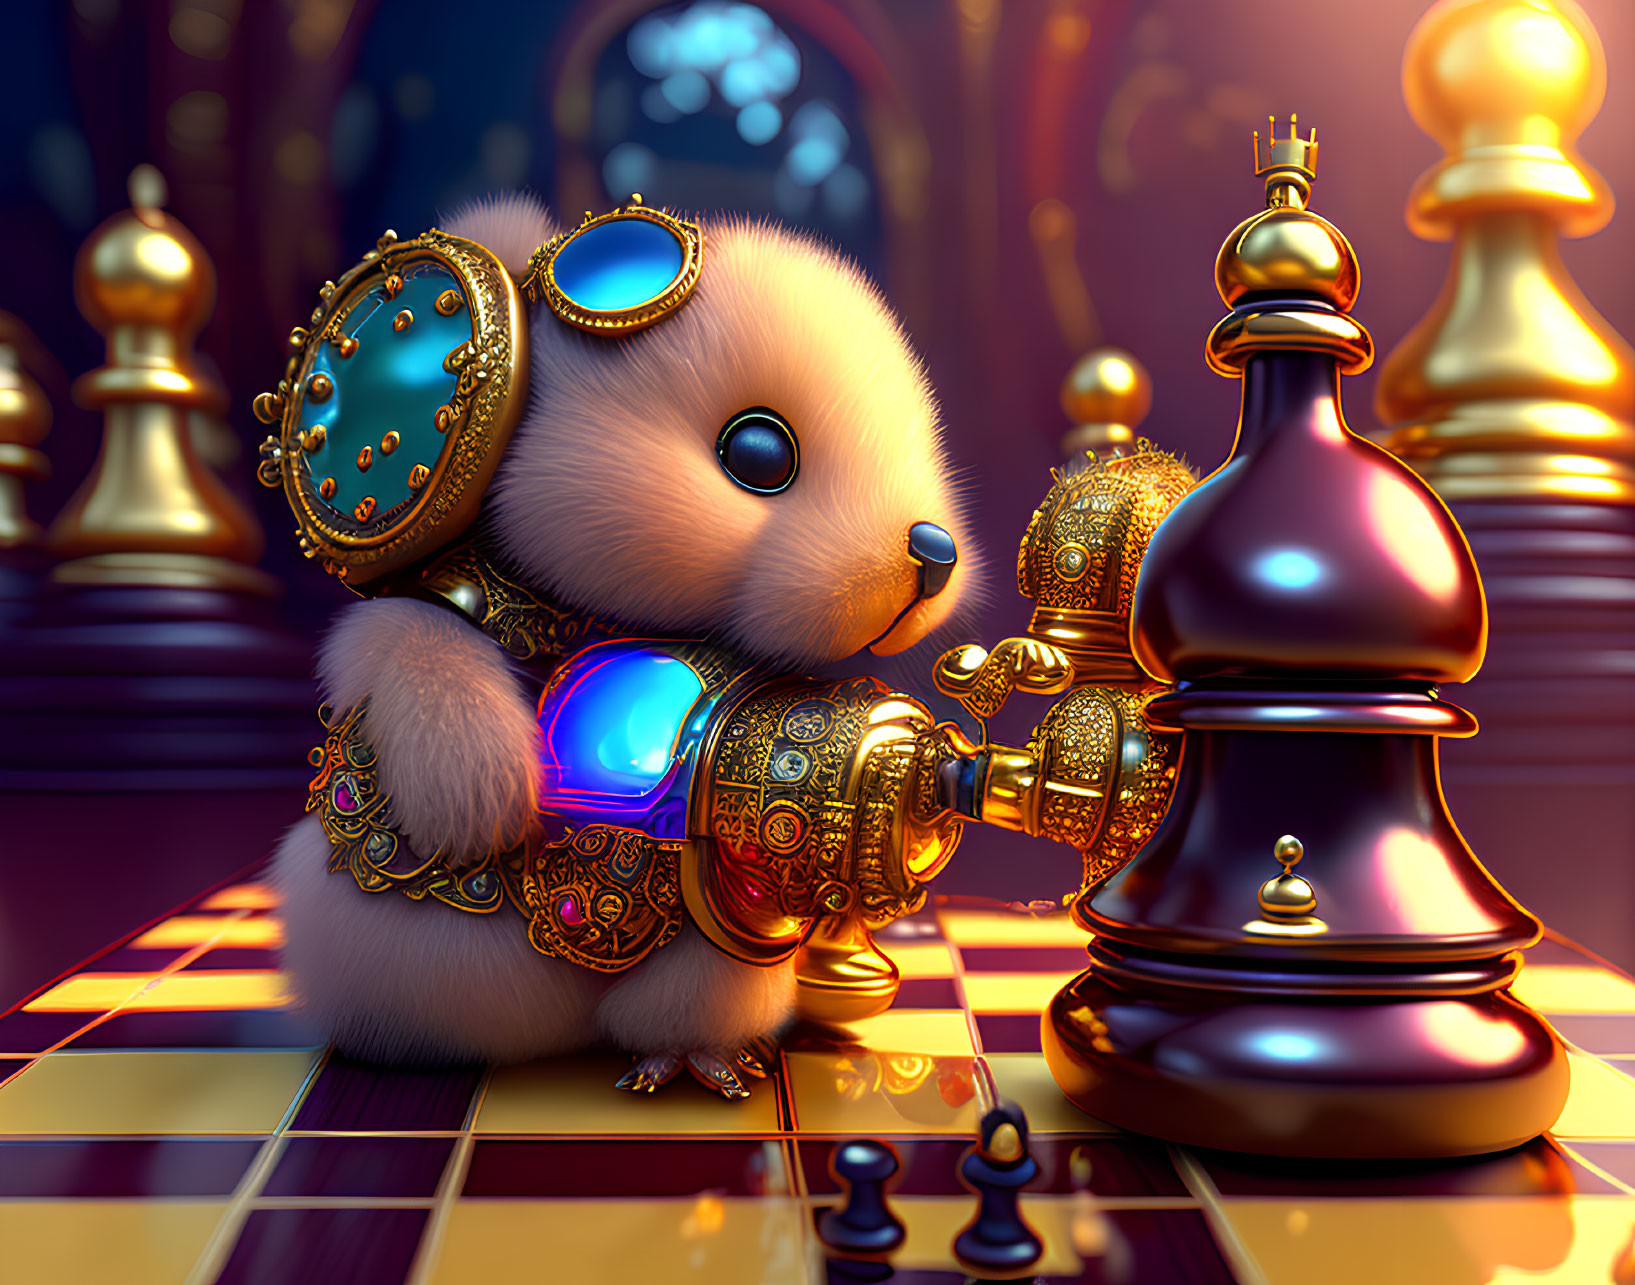 Furry creature in golden armor beside chess pawn on chessboard